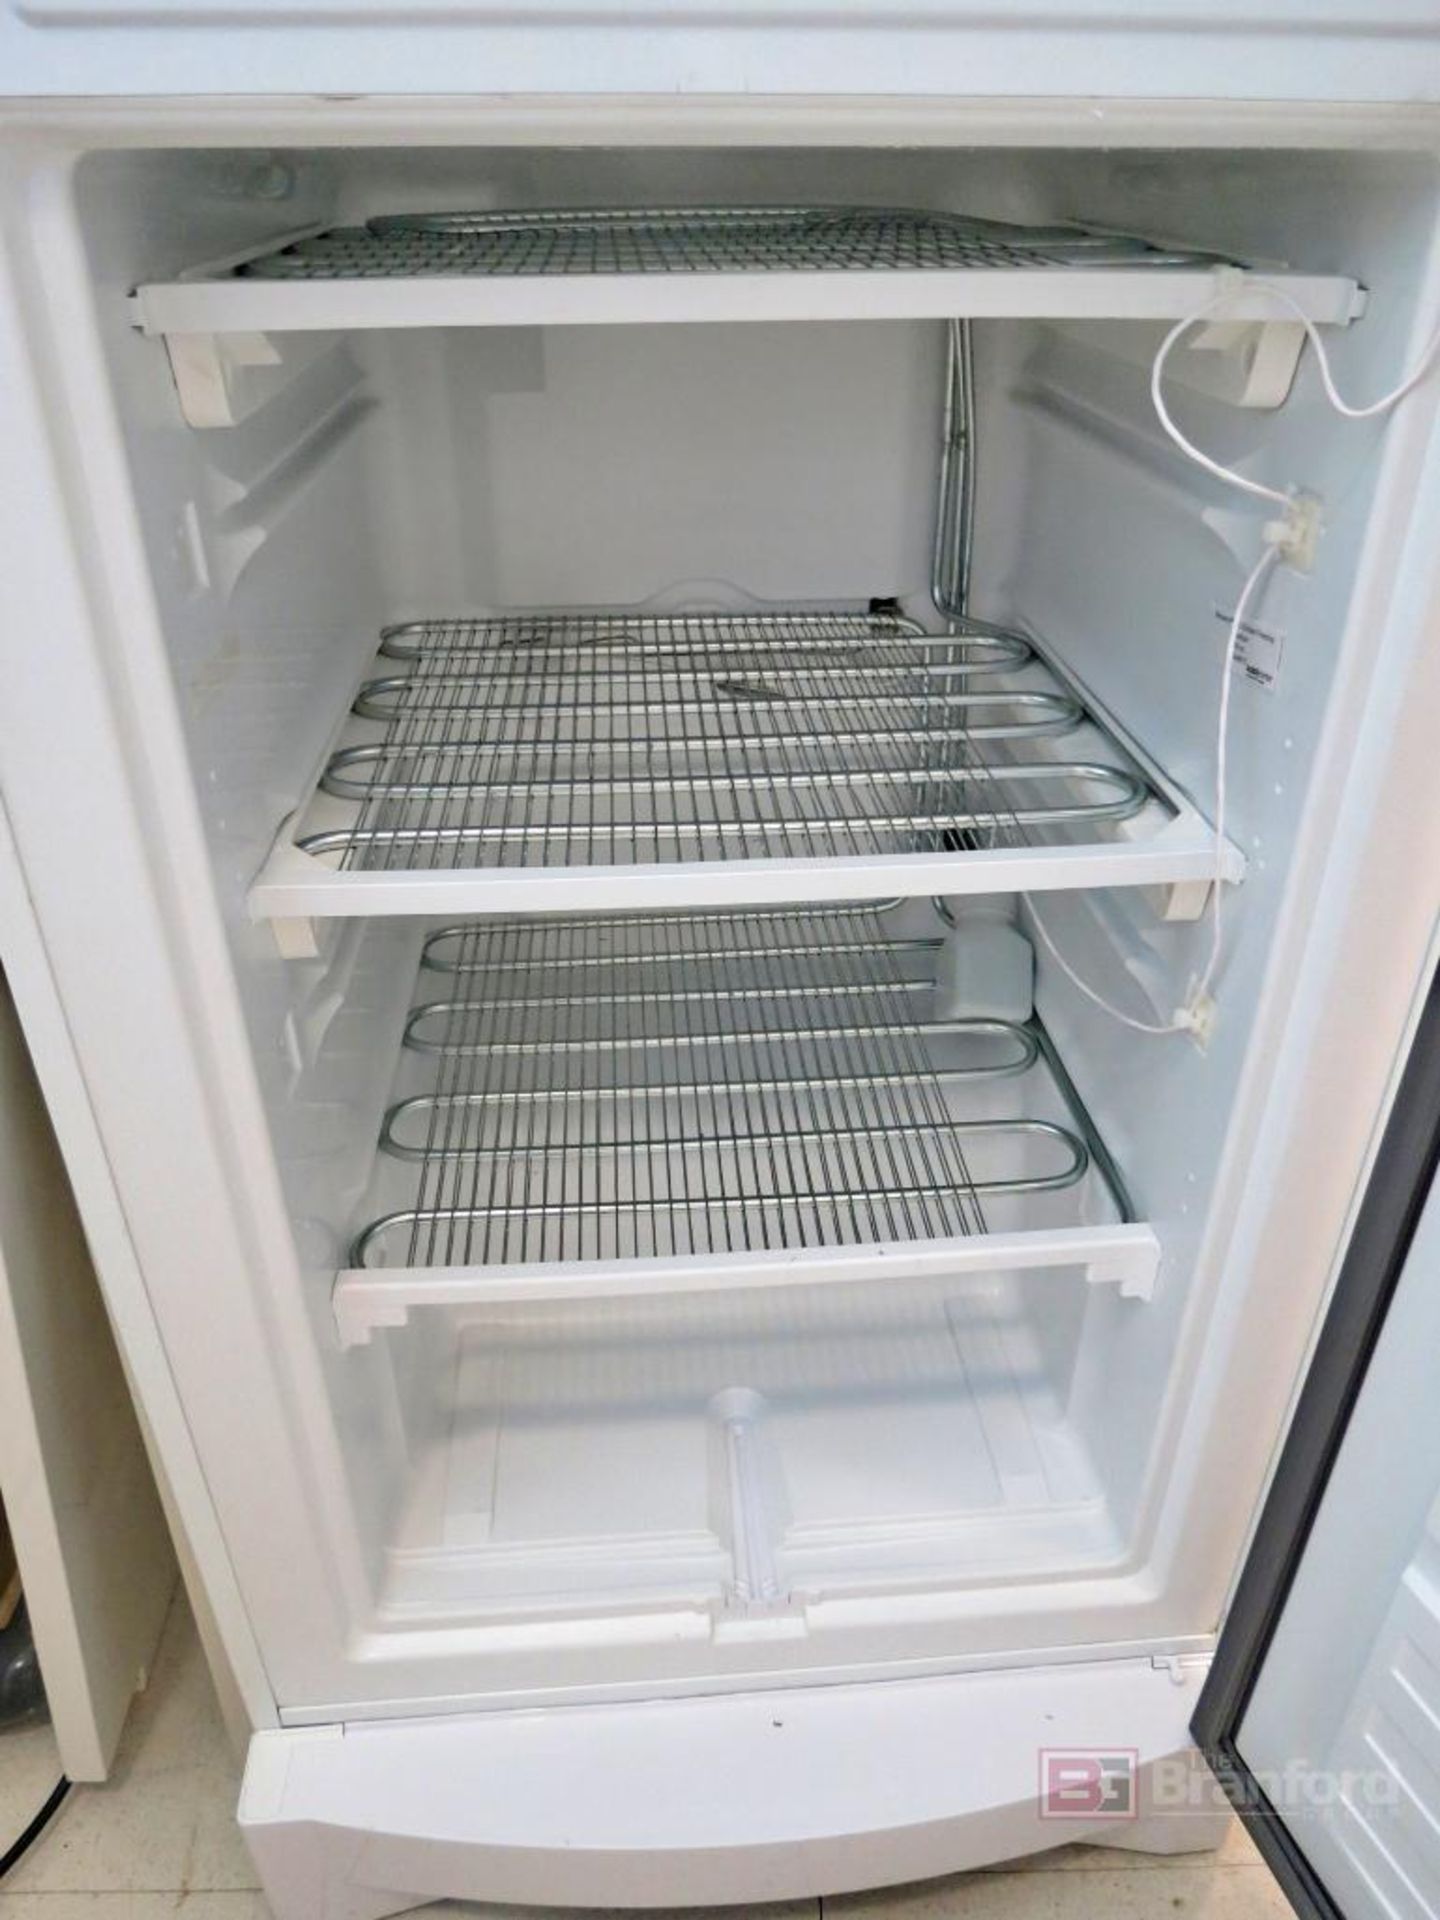 Thermo 12LCEETSA Double Stack Refrigerator - Image 4 of 5